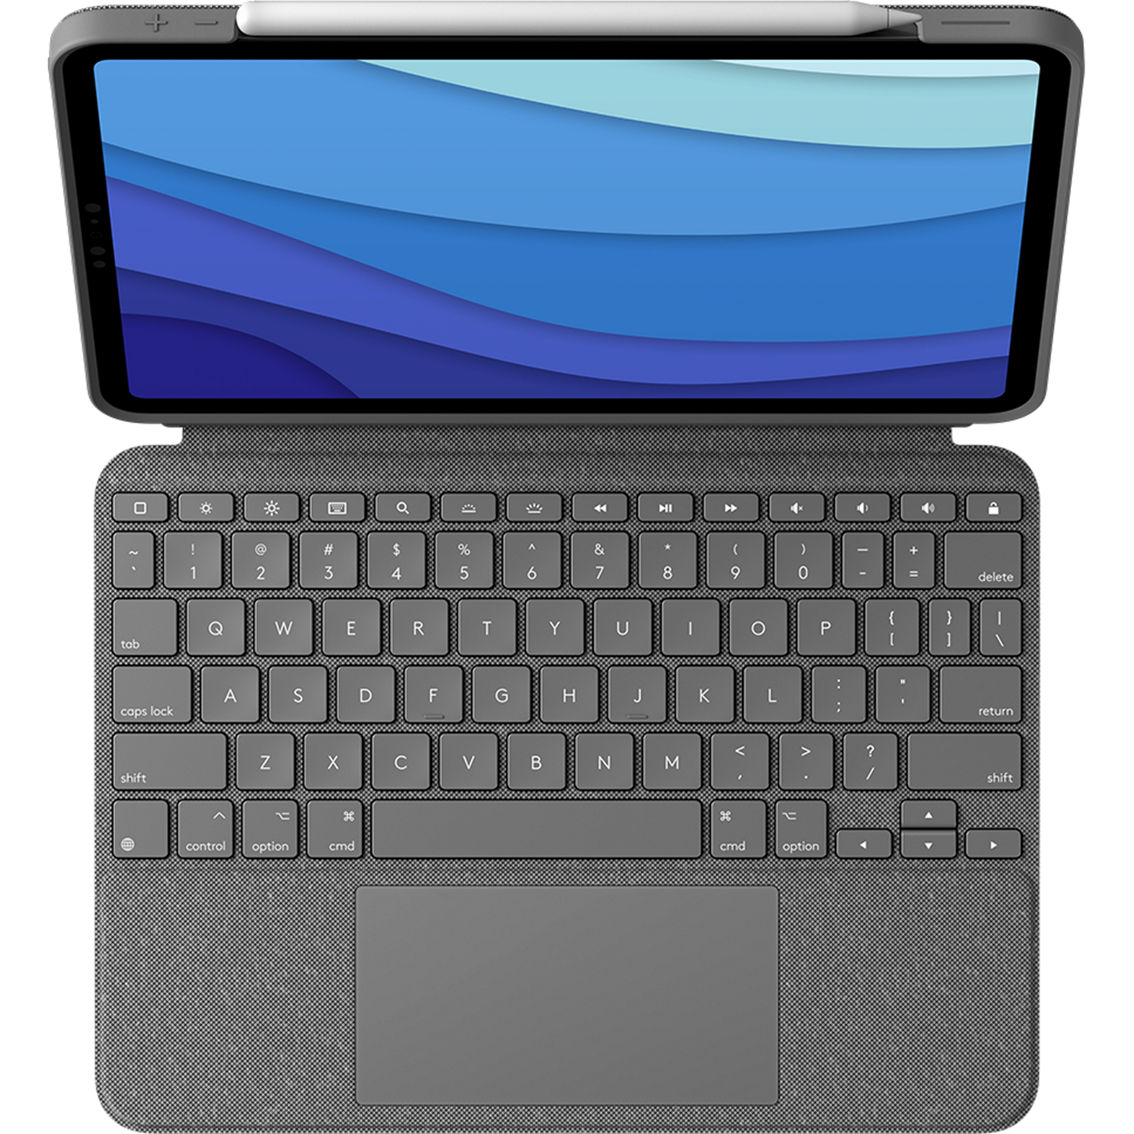 Logitech Touch iPad Pro Keyboard for Apple iPad Pro 11 in. (1, 2, 3 and 4 Gen.) - Image 4 of 5